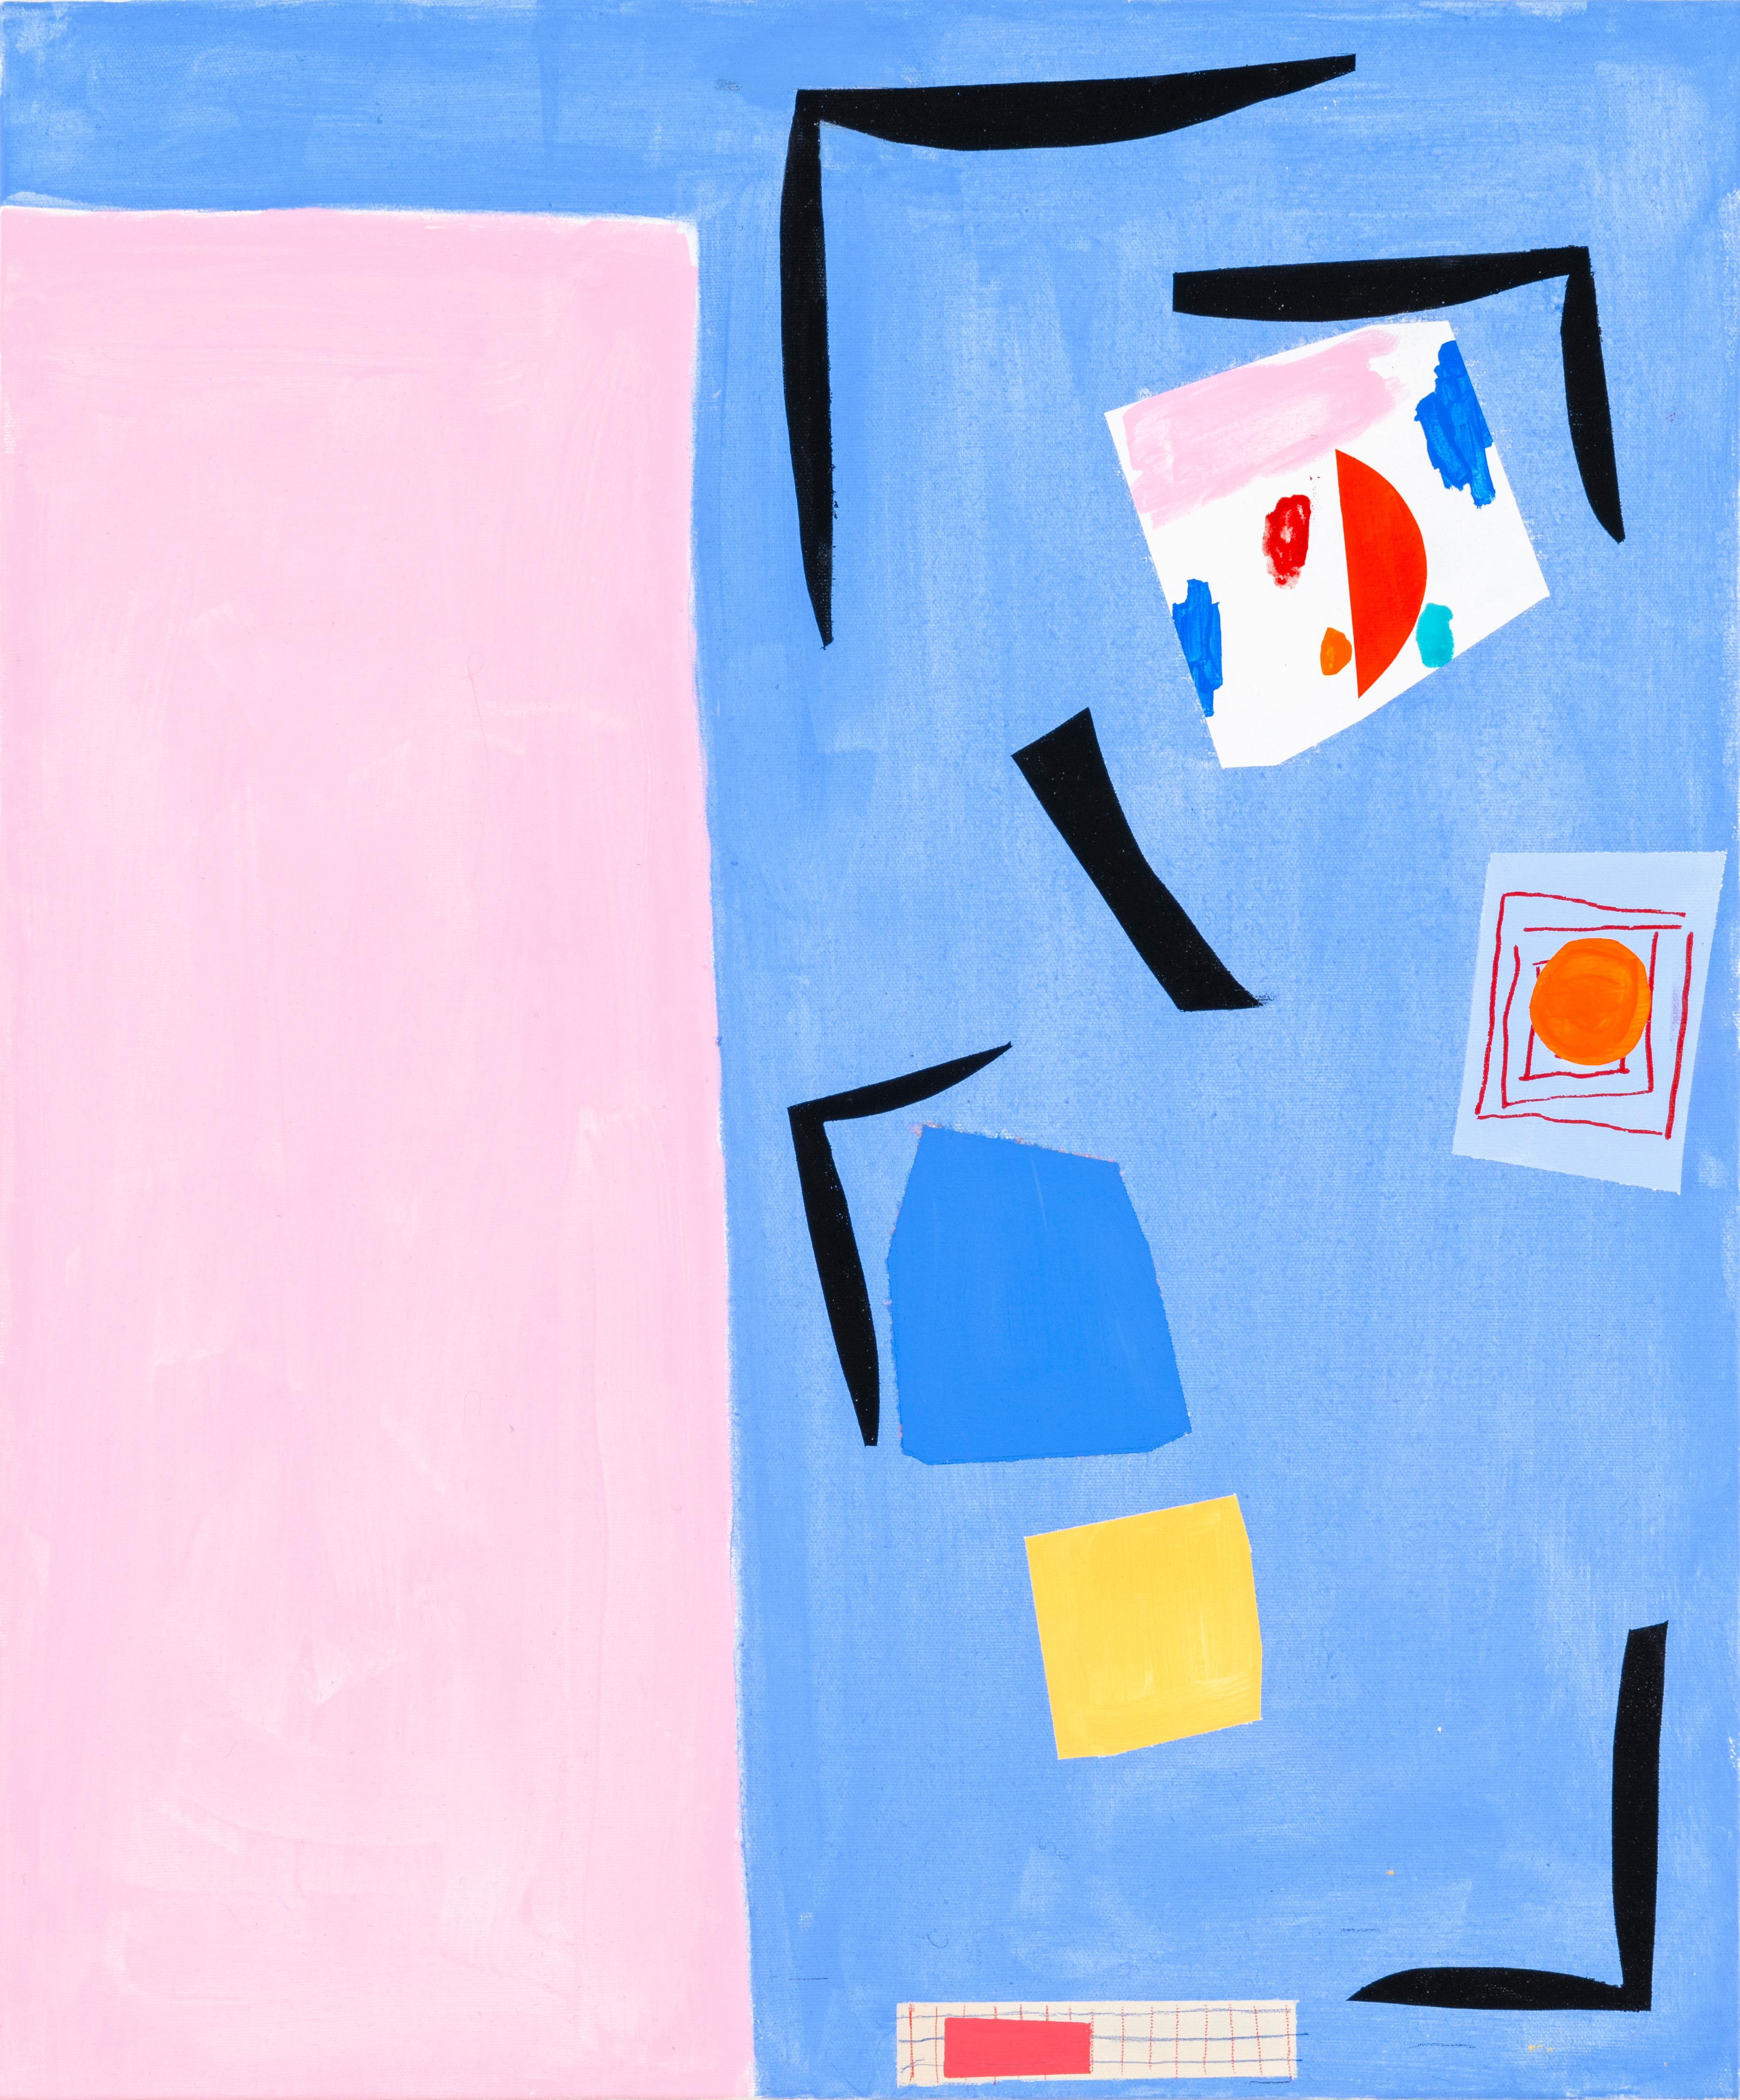 Margo Margolis Abstract Painting - "Studio" Playful Matisse-like Abstraction Blue, Pink, Red, Yellow, Black, White